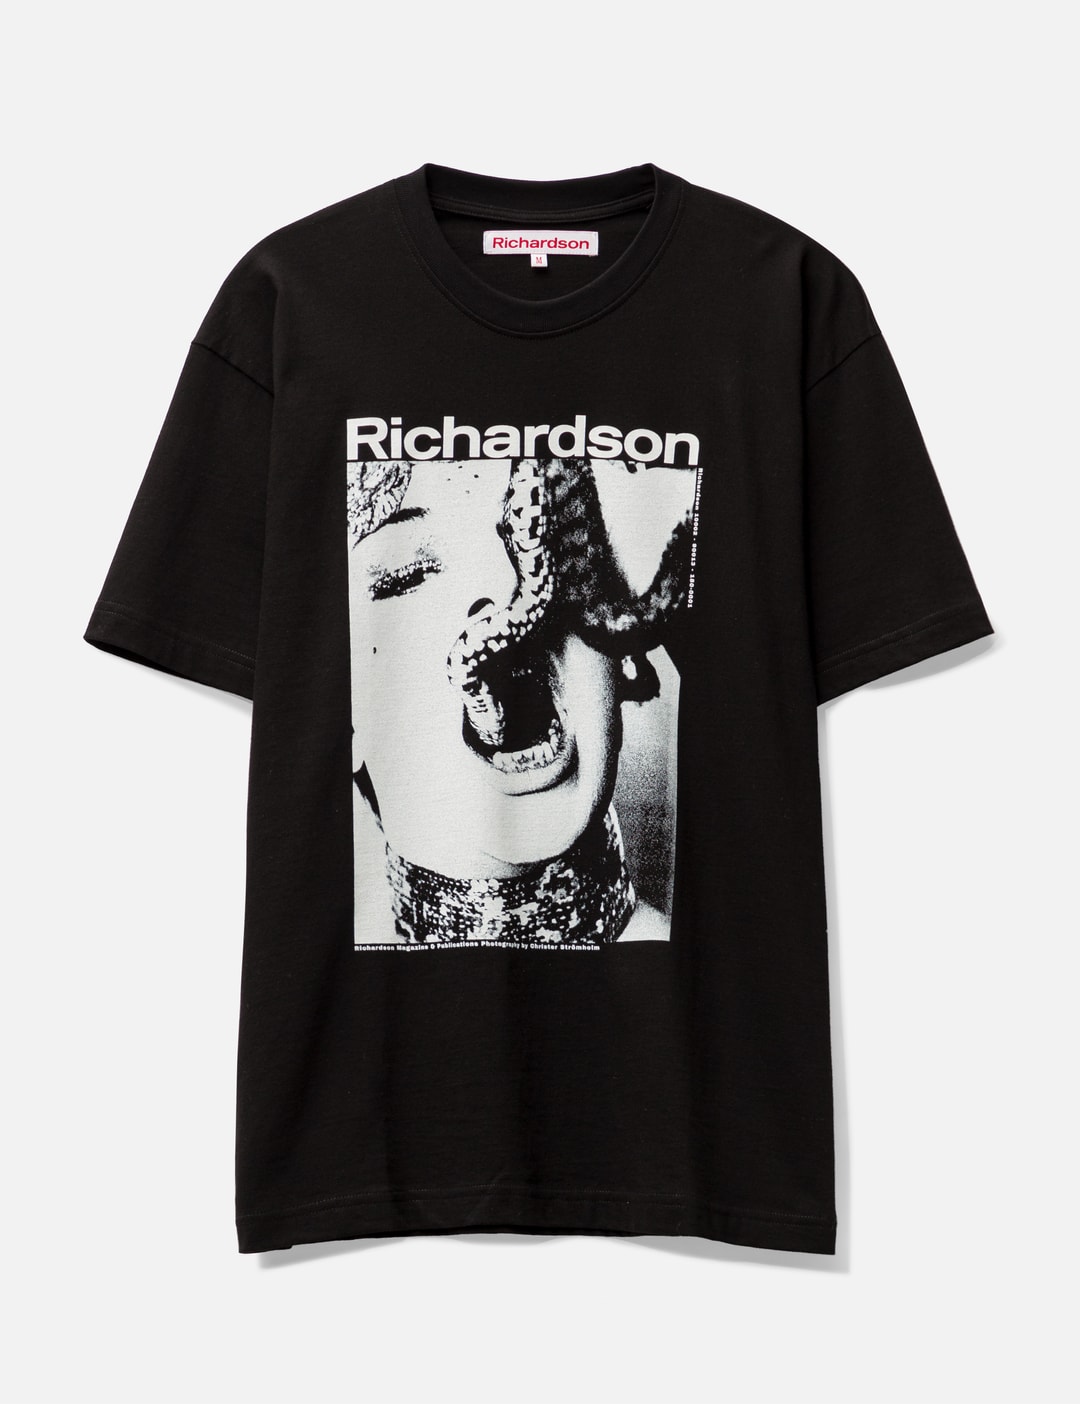 Richardson - CHRISTER STROMHOLM T-SHIRT | HBX - Globally Curated ...